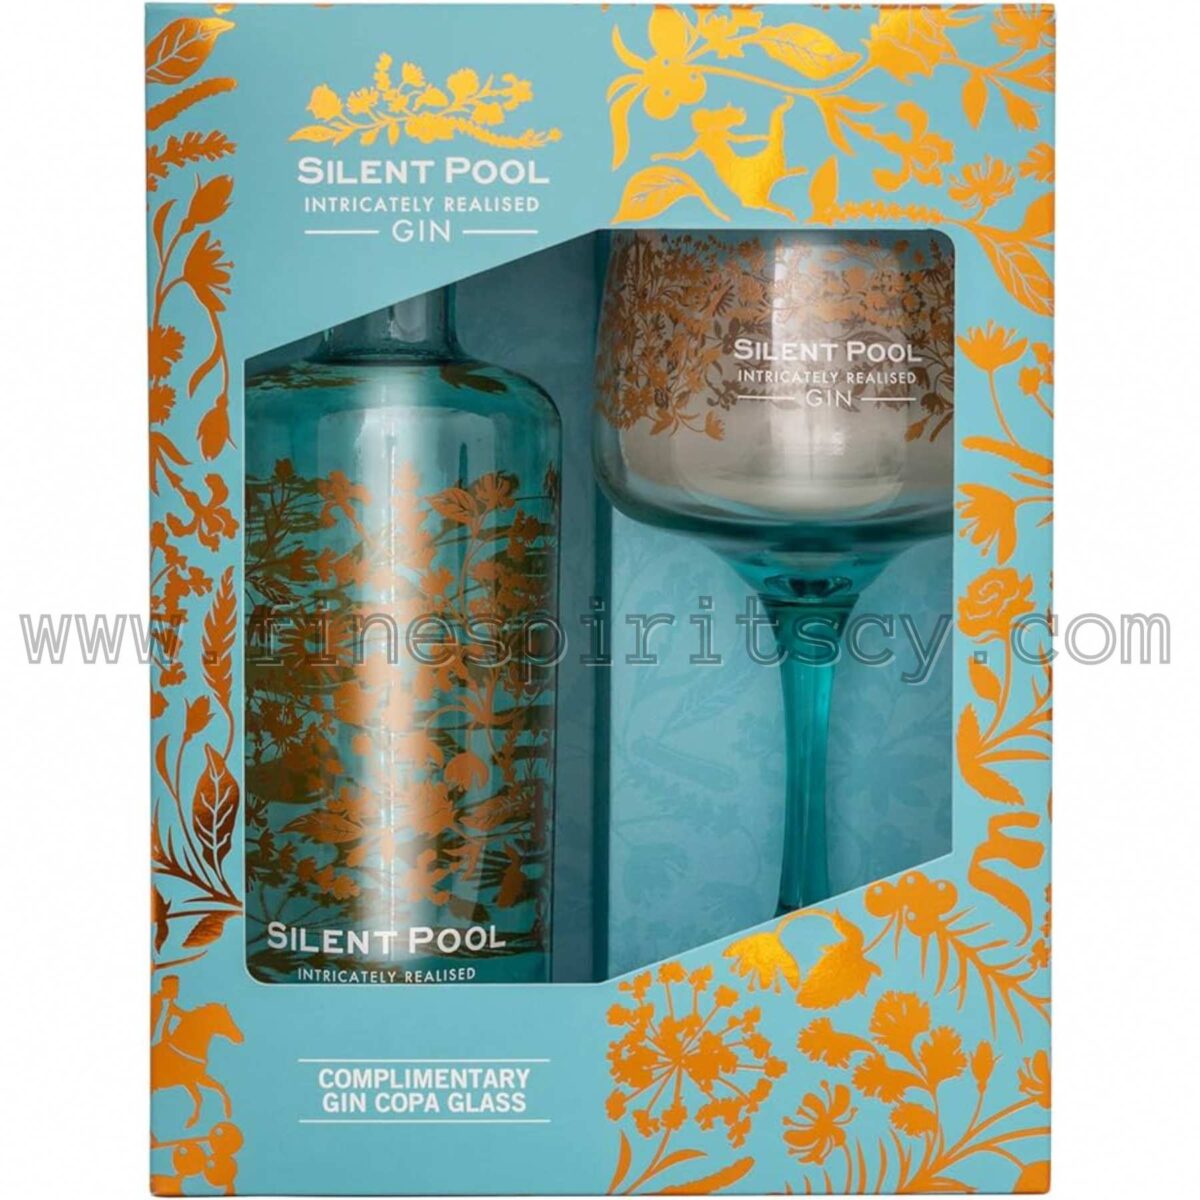 Silent pool gift set with glass gin cyprus price online order fine spirits